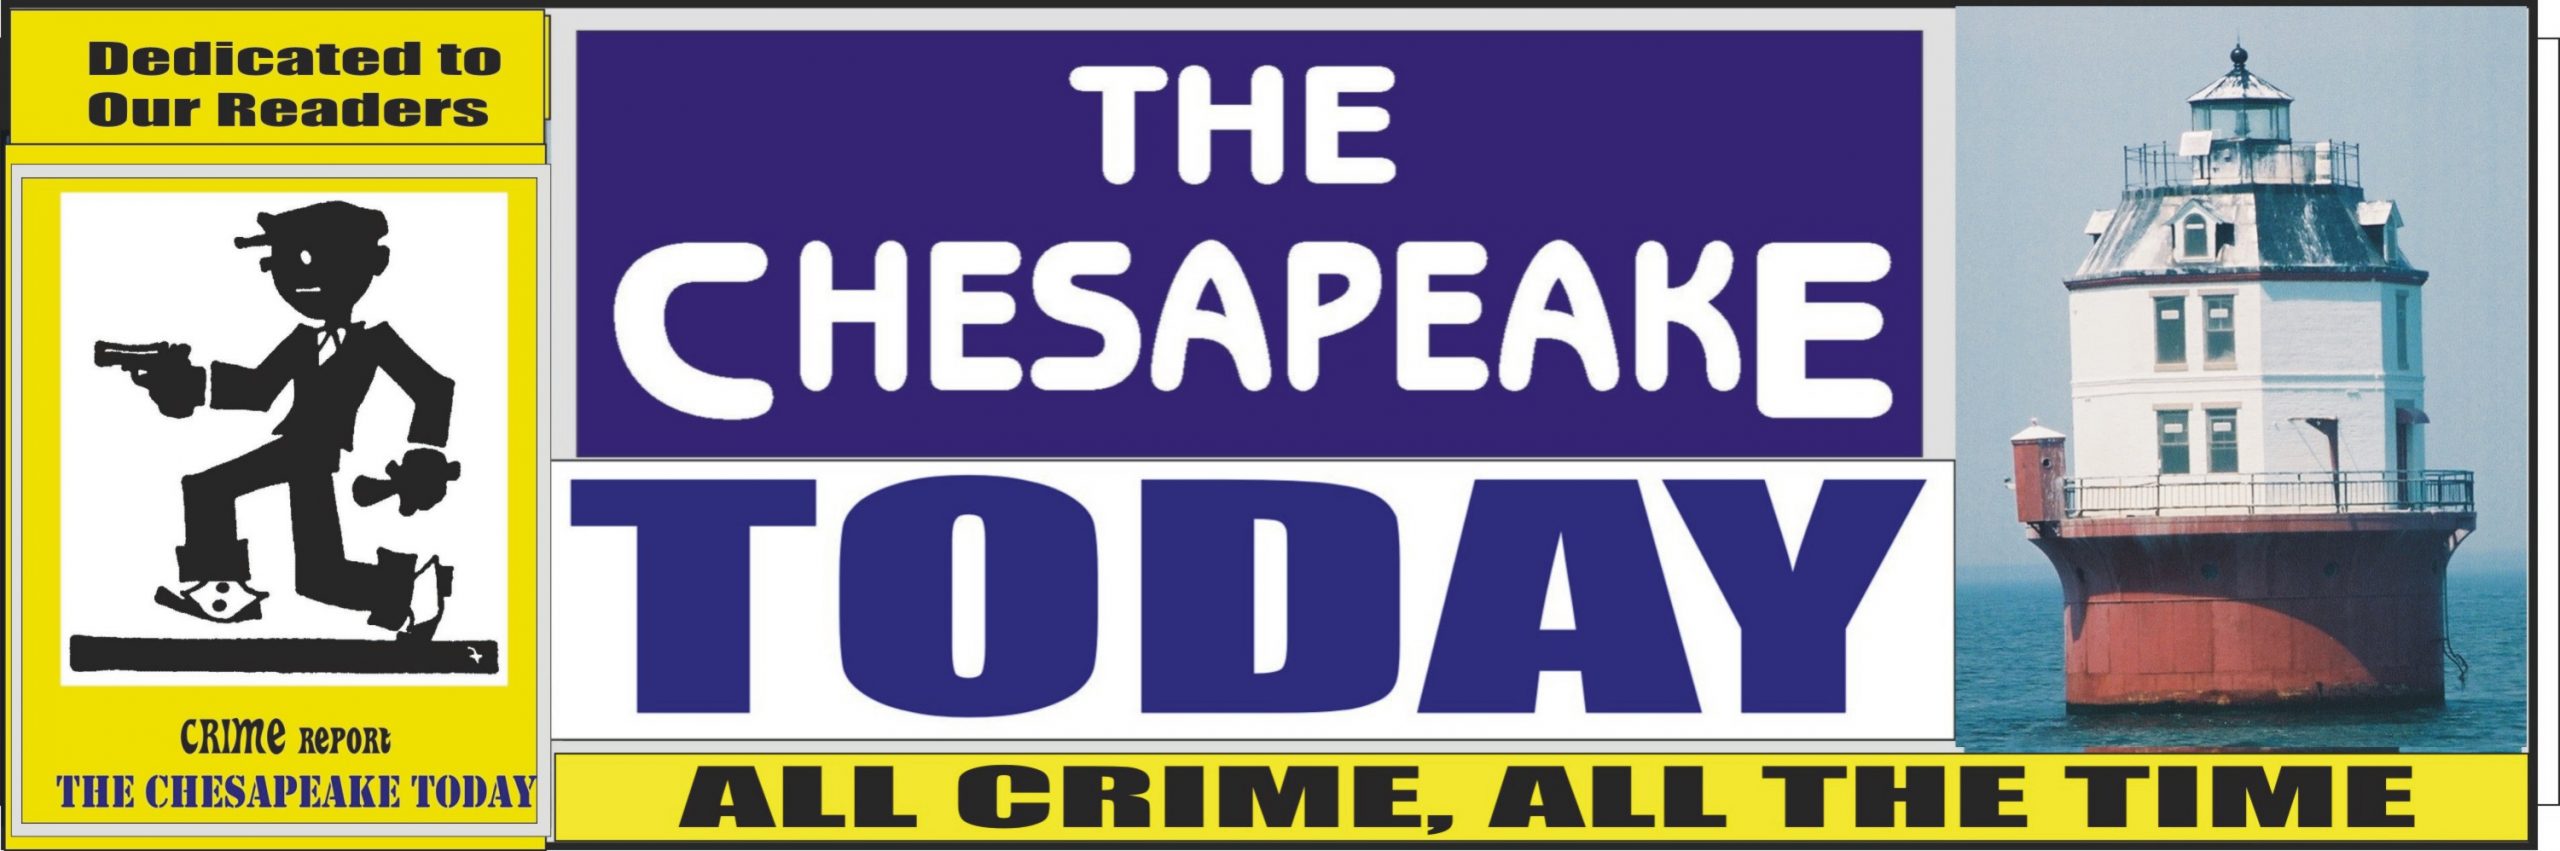 THE CHESAPEAKE TODAY – ALL CRIME, ALL THE TIME